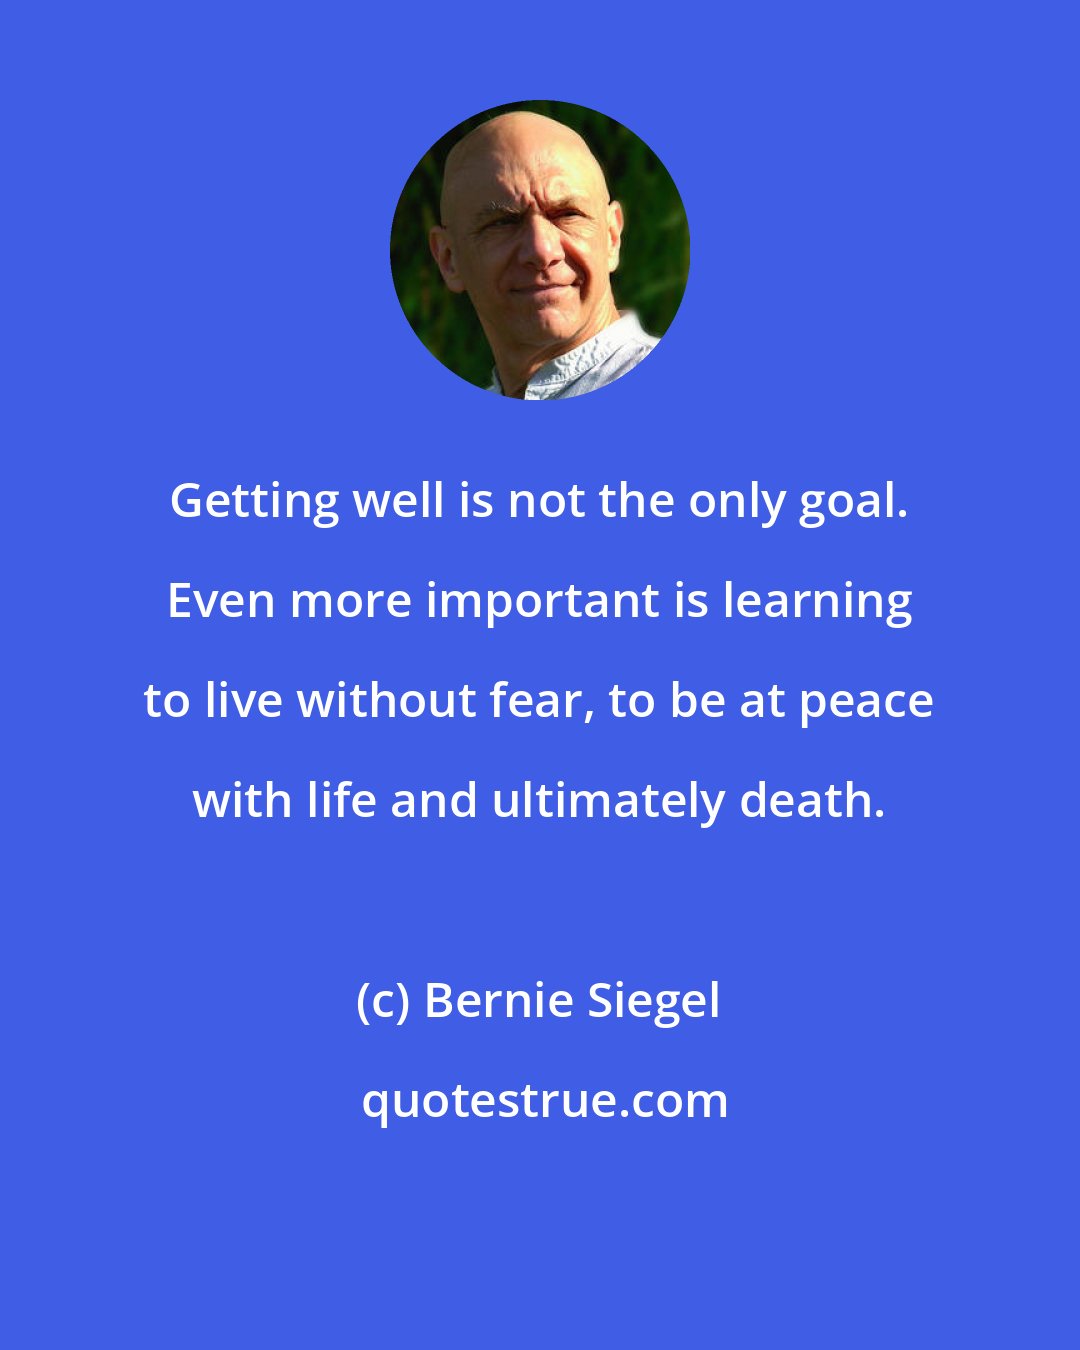 Bernie Siegel: Getting well is not the only goal. Even more important is learning to live without fear, to be at peace with life and ultimately death.